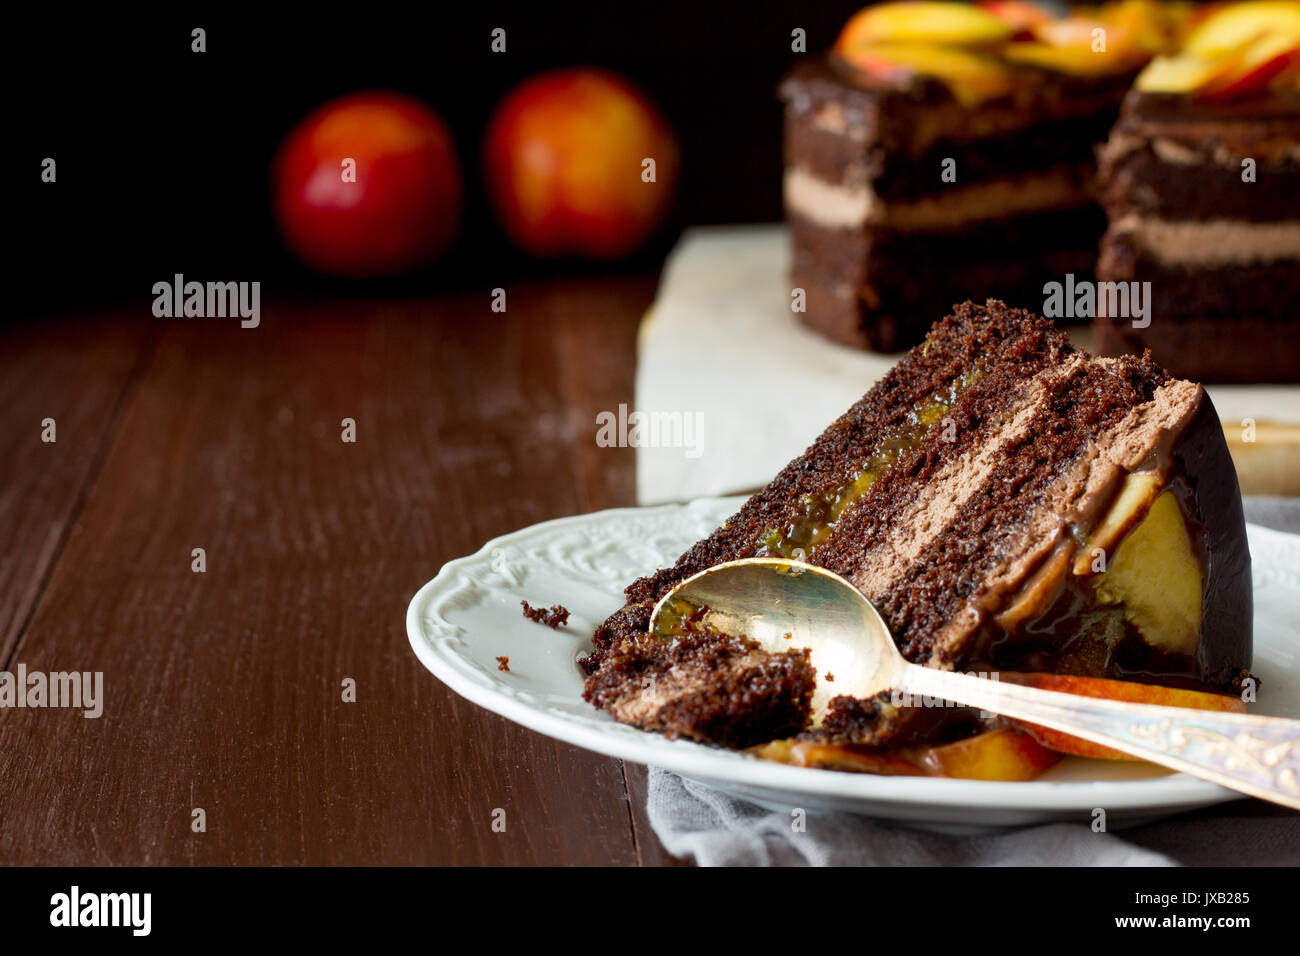 Piece of chocolate cake with nectarines on white dish selective focus Stock Photo